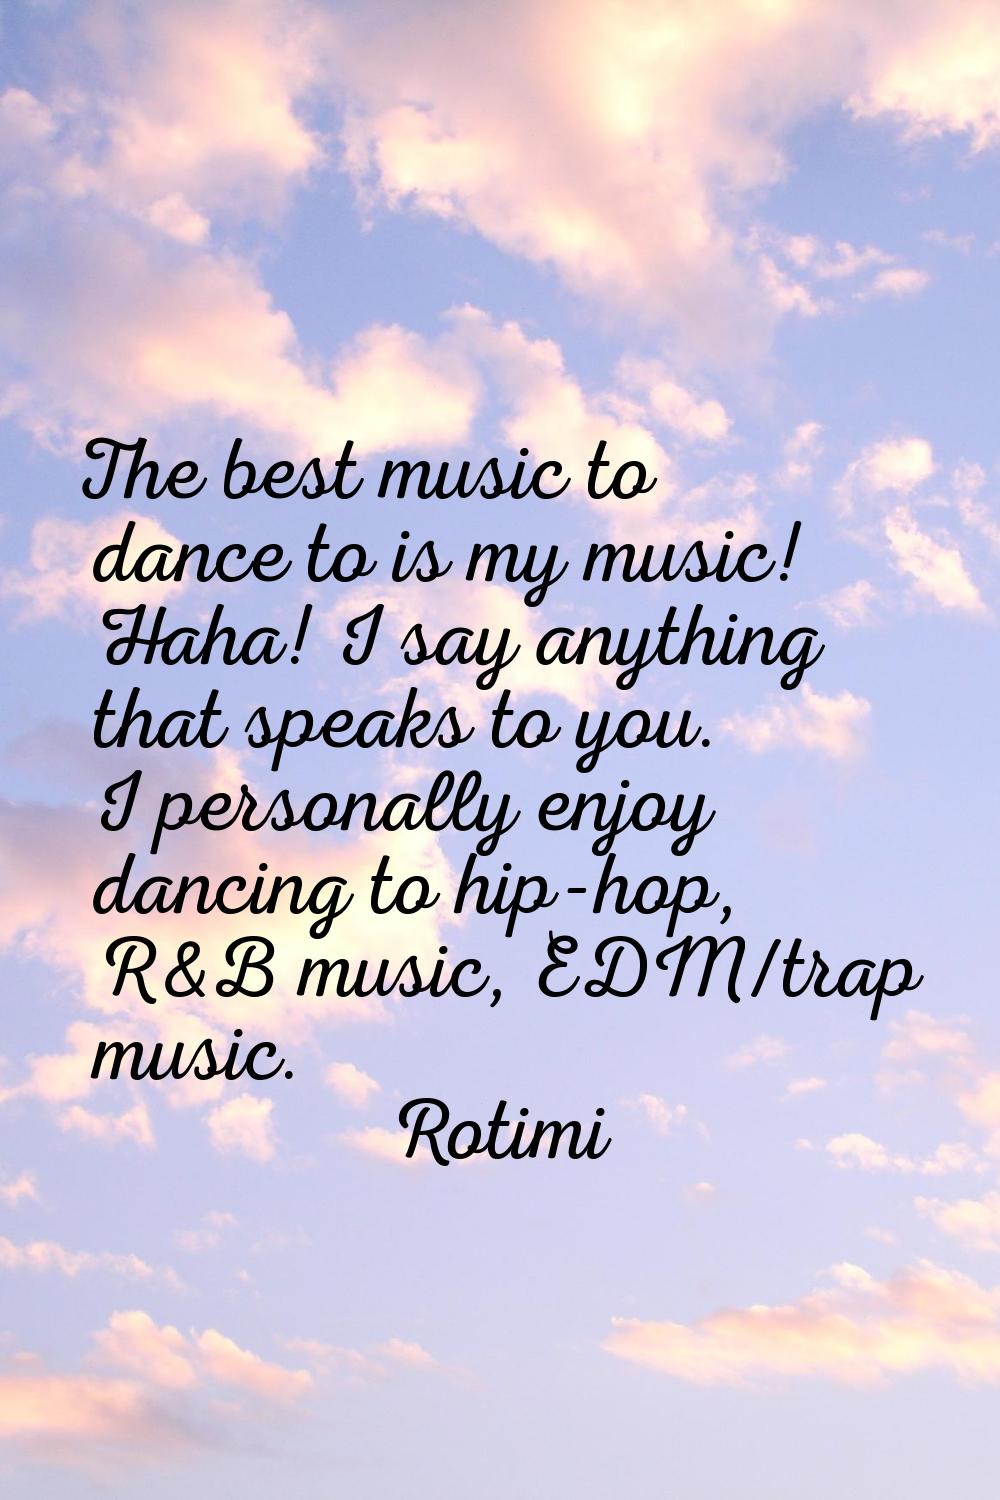 The best music to dance to is my music! Haha! I say anything that speaks to you. I personally enjoy